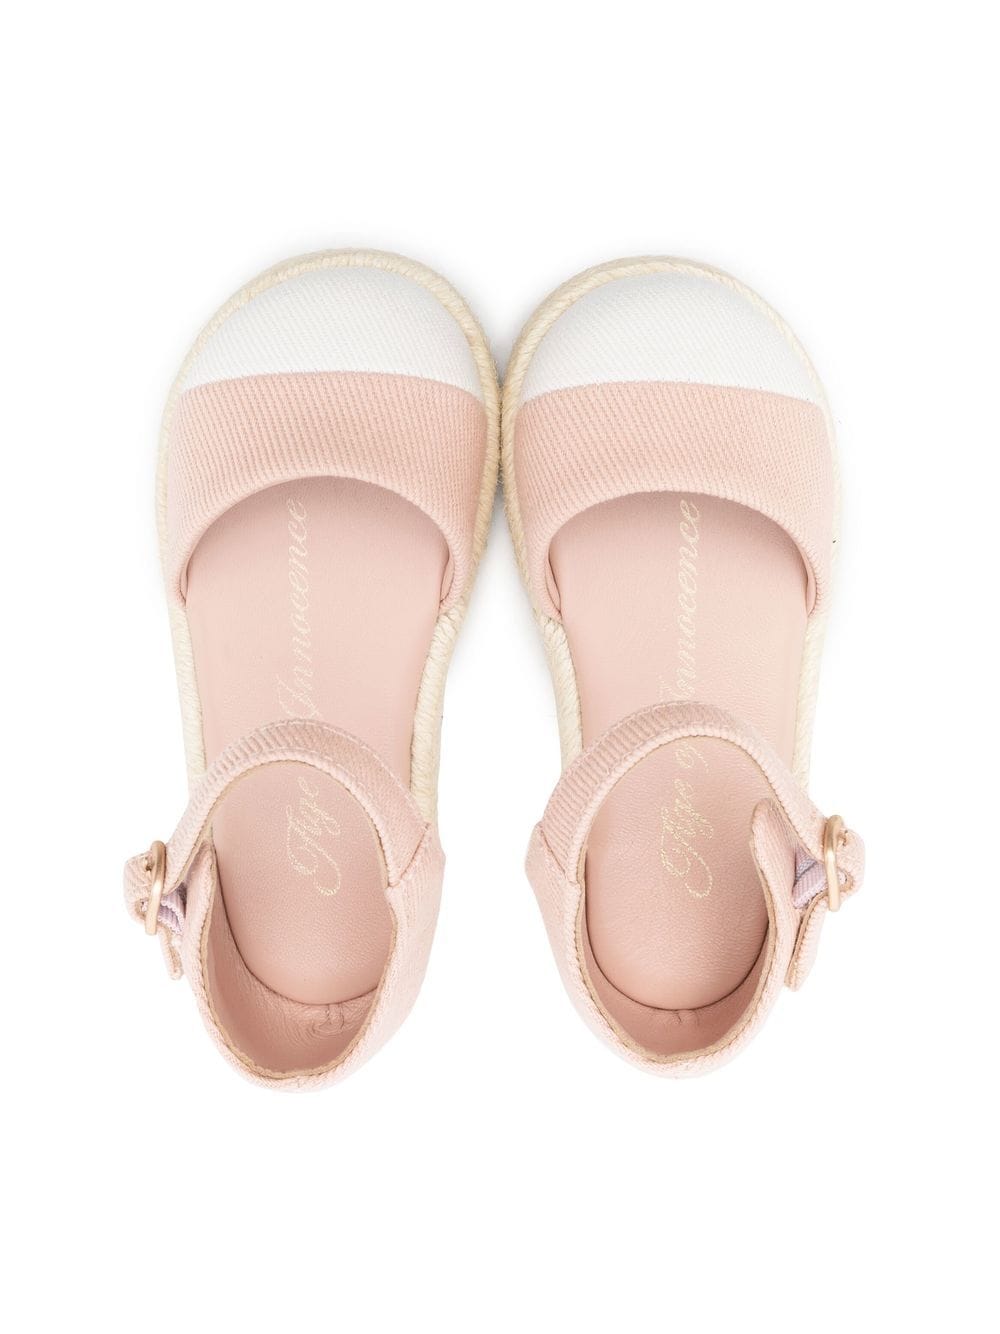 age of innocence round-toe ballerina shoes - pink